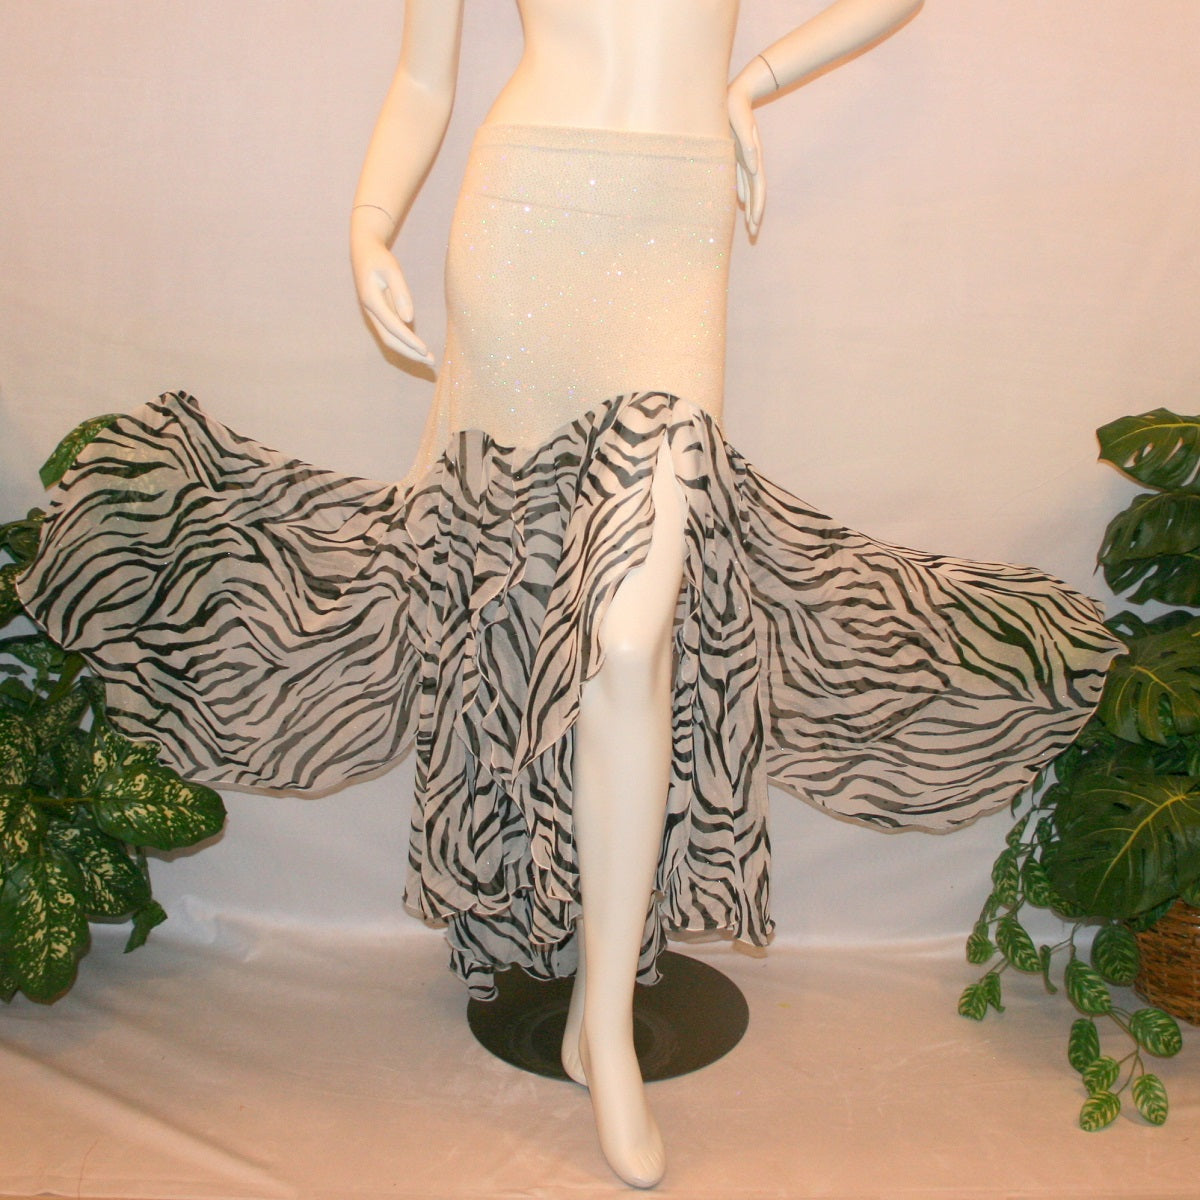 flaired view of Ballroom style skirt created of white glitter slinky with yards of zebra print flowing panels will work great to create a converta ballroom dress